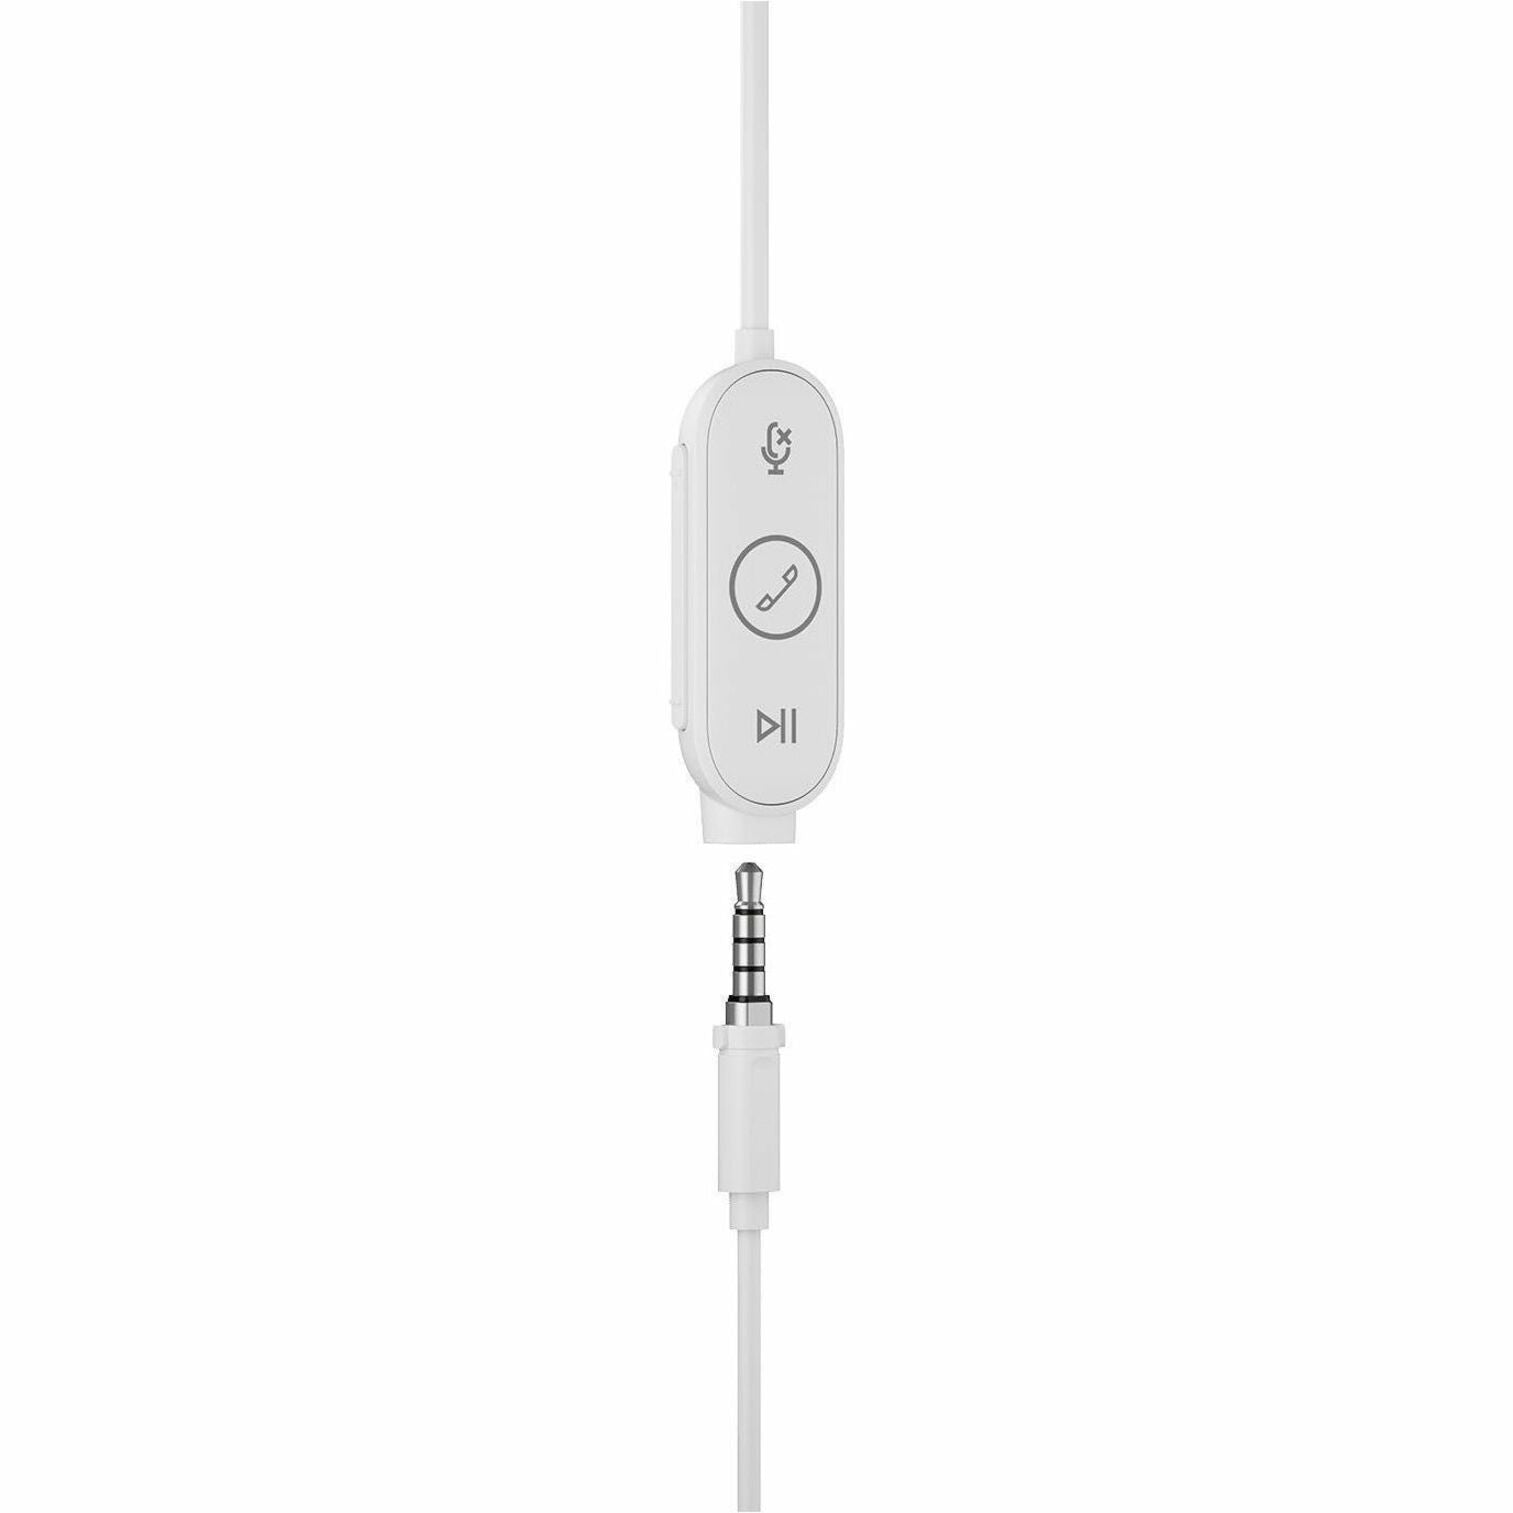 Logitech 981-001134 Zone Wired Earbuds, Binaural Earset with Noise Cancelling Microphone, USB-C Connector, Rose